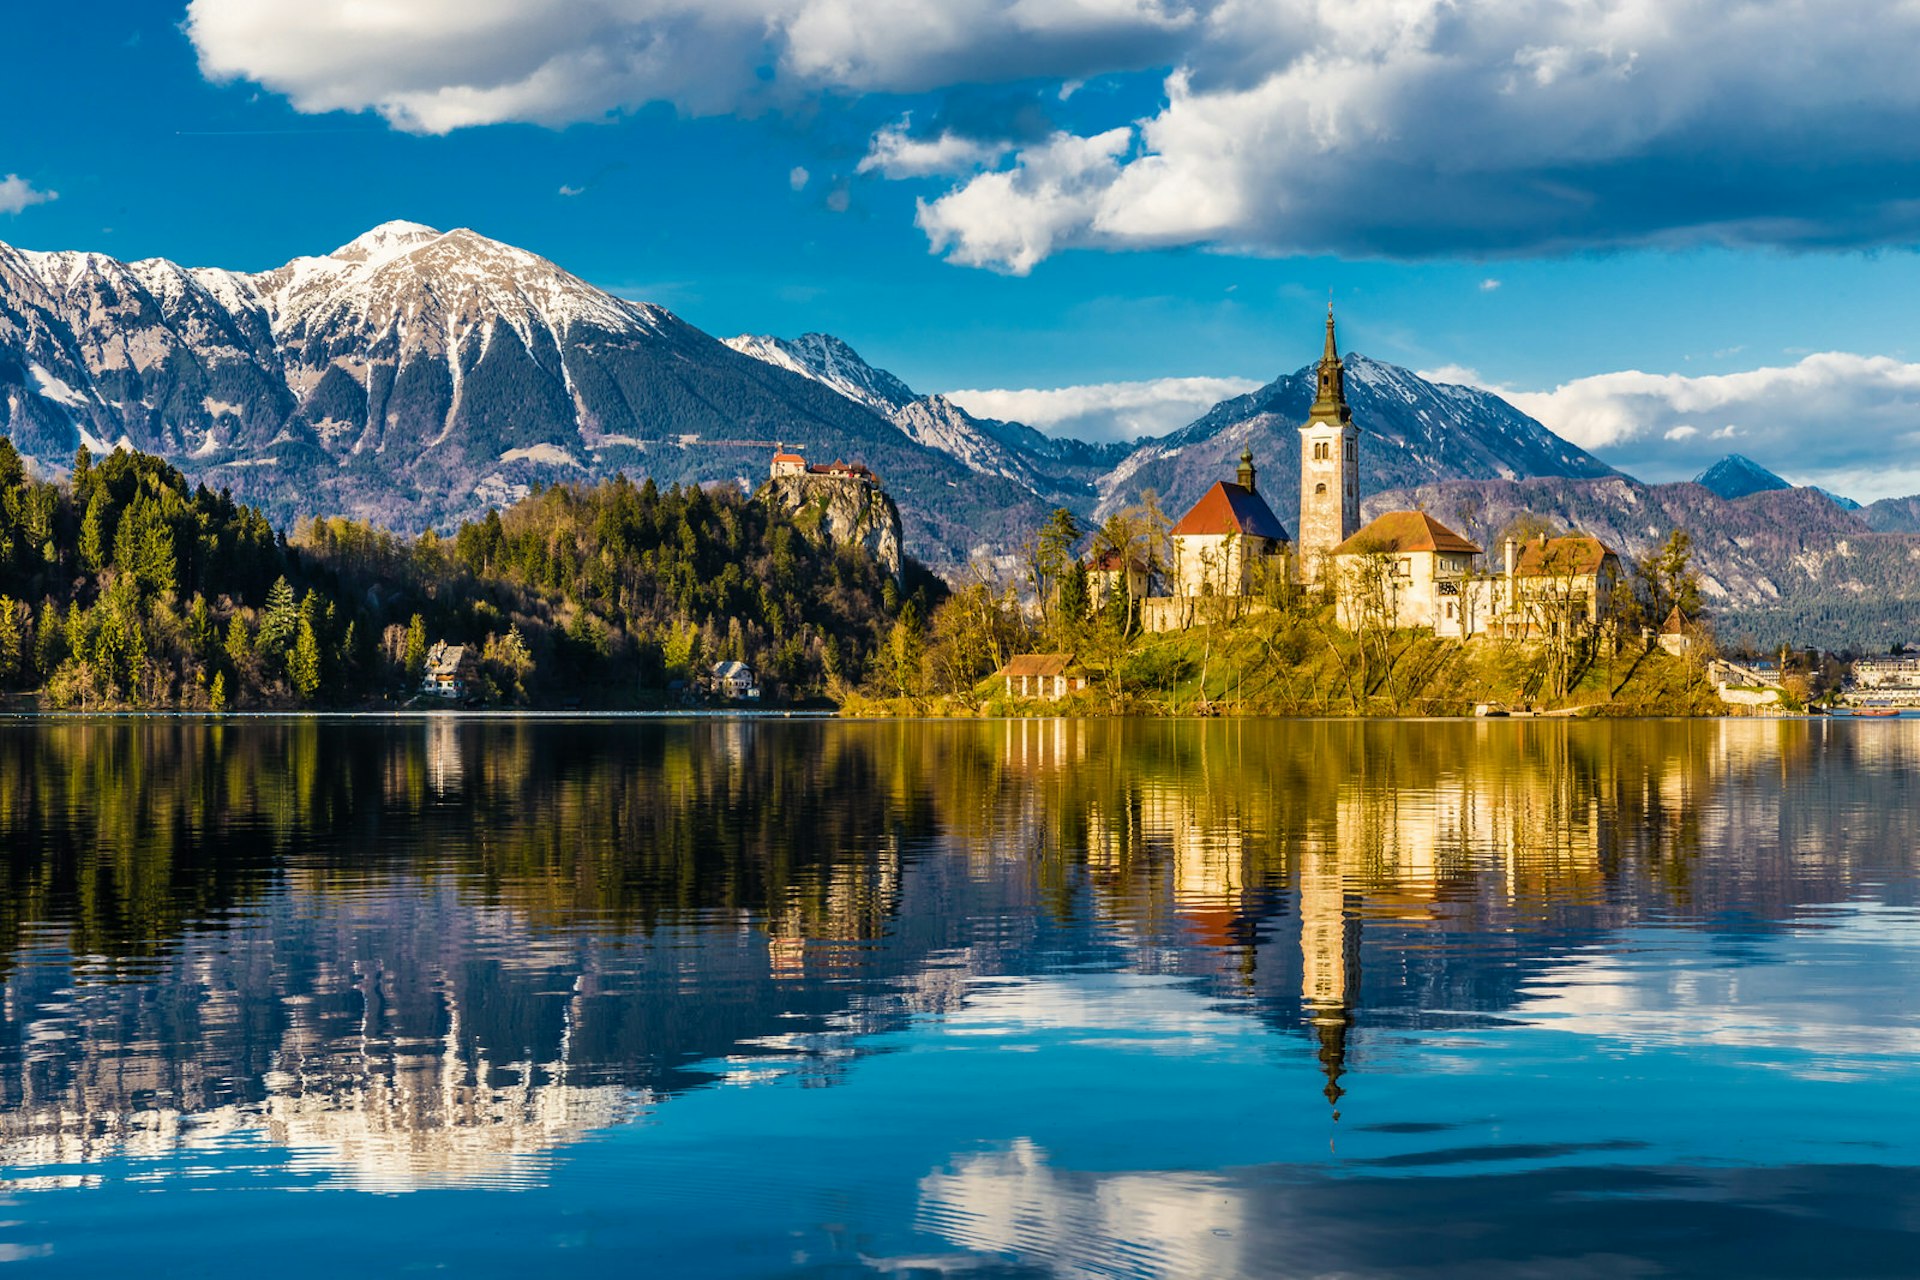 Amazing View On Bled Lake, Island,Church And Castle With Mountain Range Lake Bled © ZM_Photo / Shutterstock